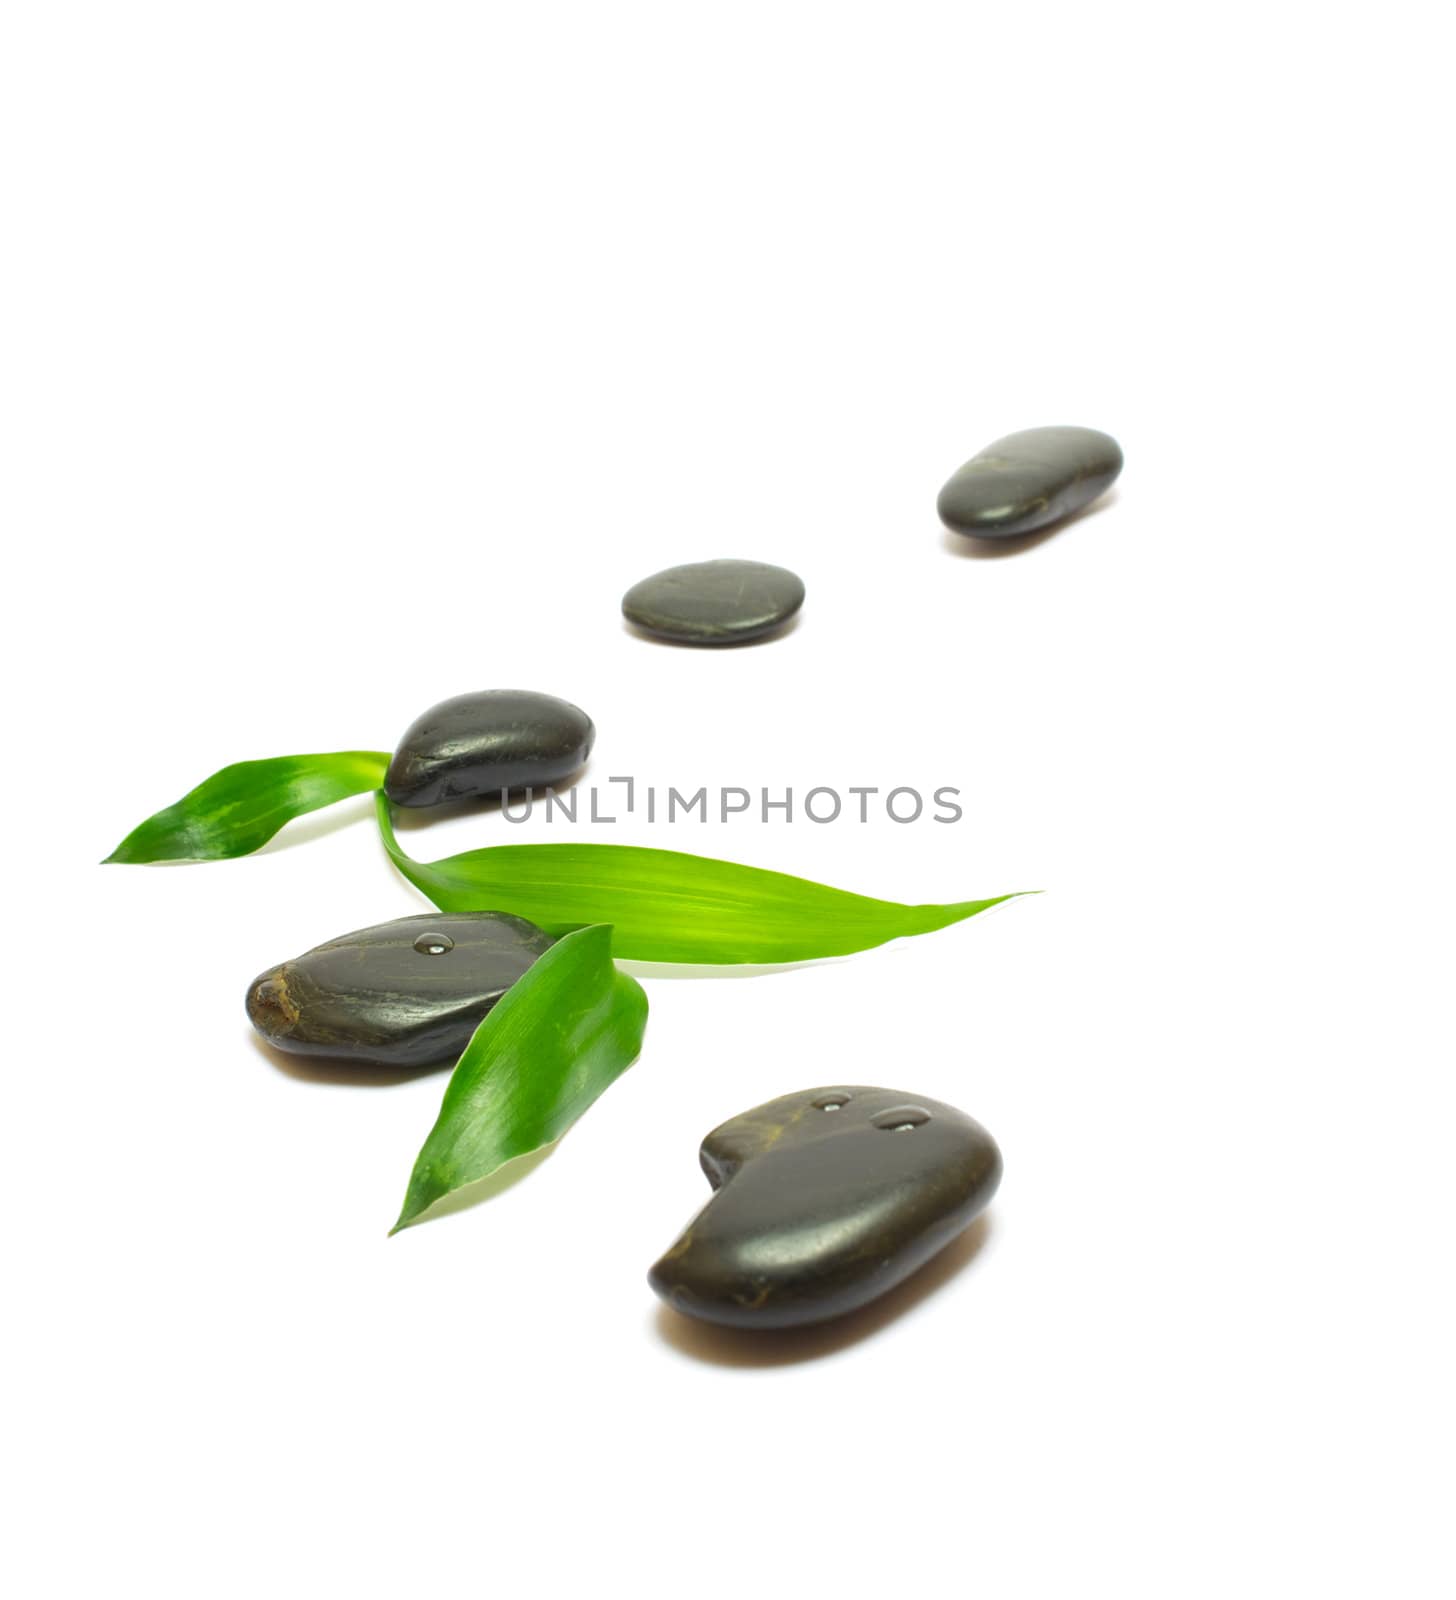 Black stones and bamboo leafs isolated on white